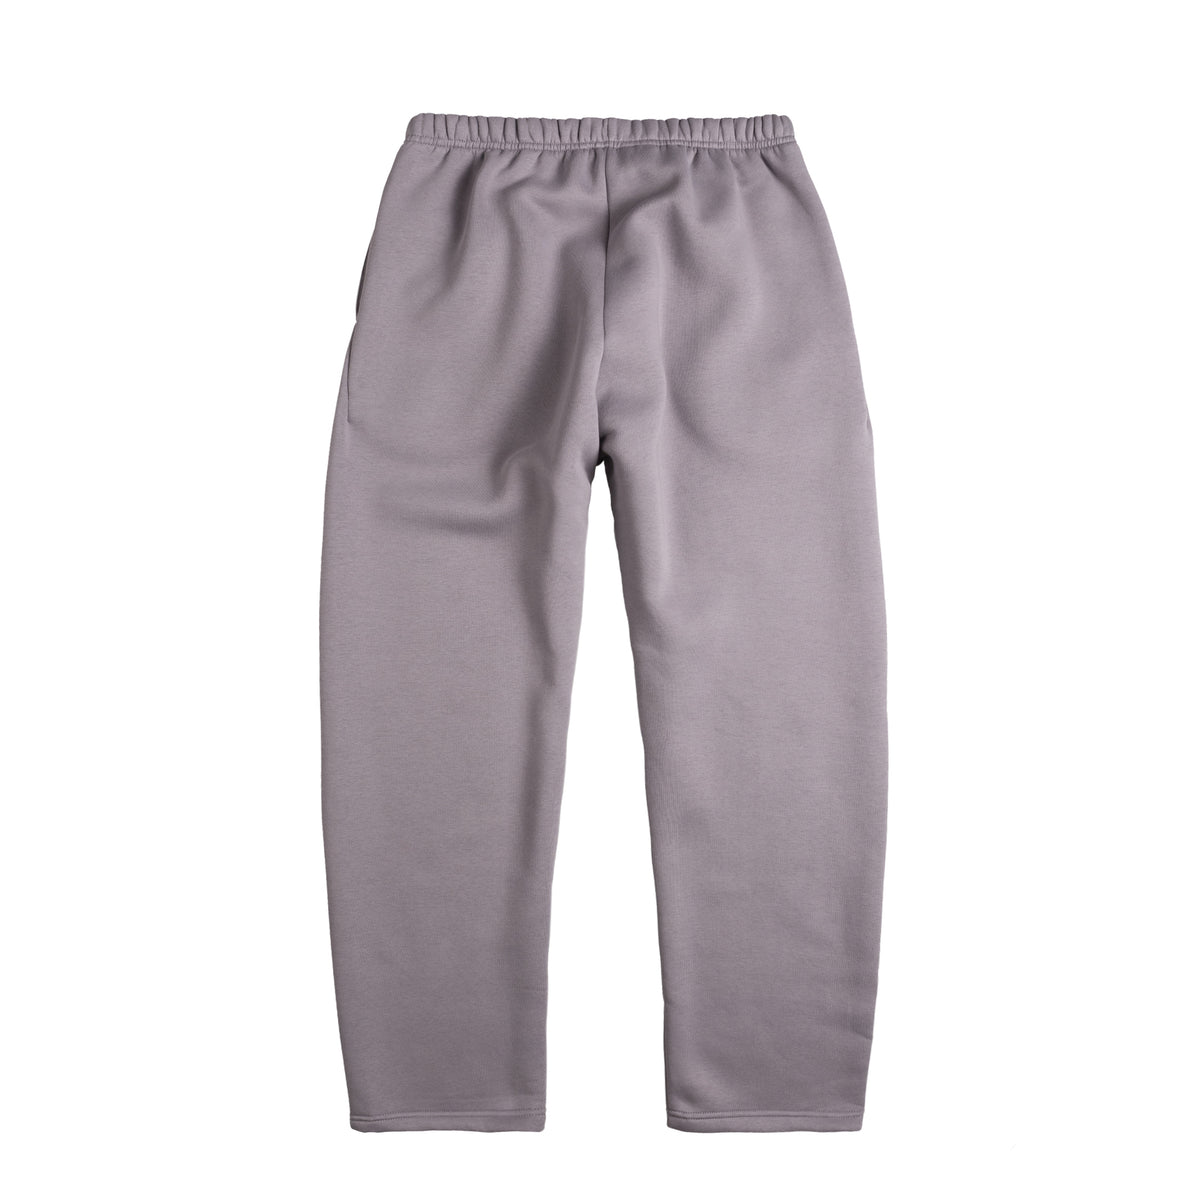 Perplex Trackpants Shadow – buy now at Asphaltgold Online Store!